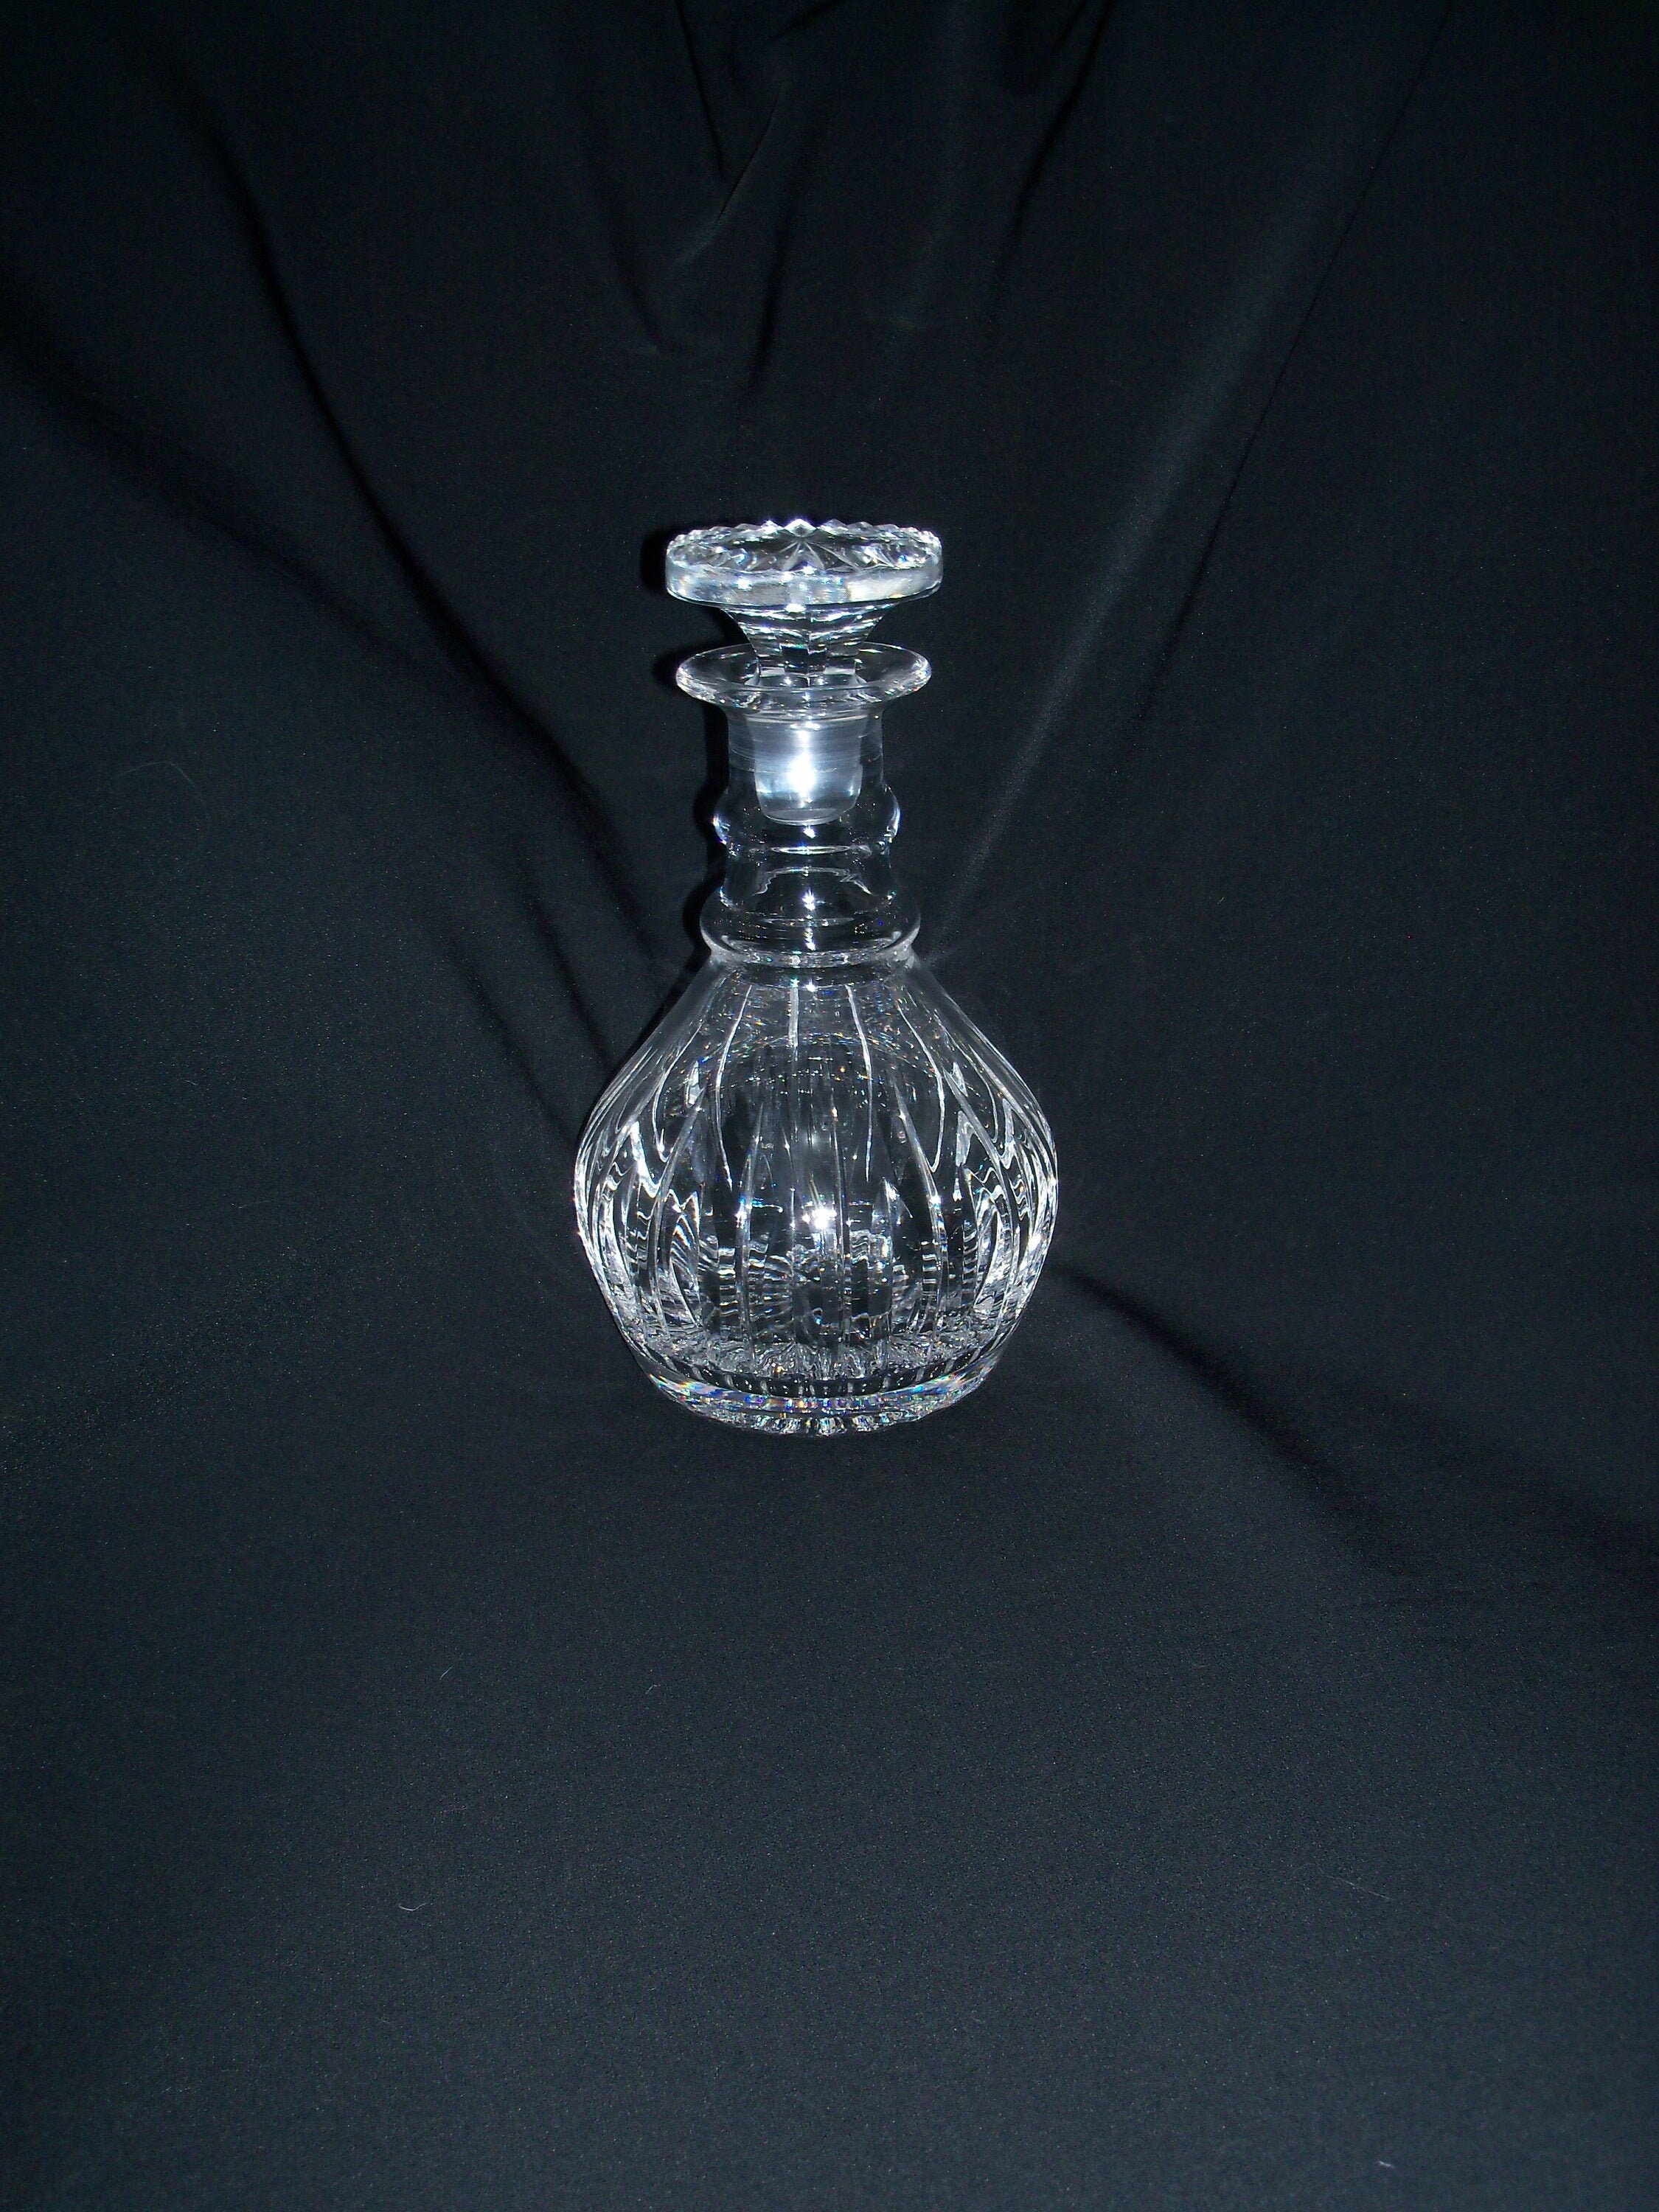 Stuart Crystal, Hardwicke, Wine or Water Carafe – With A Past